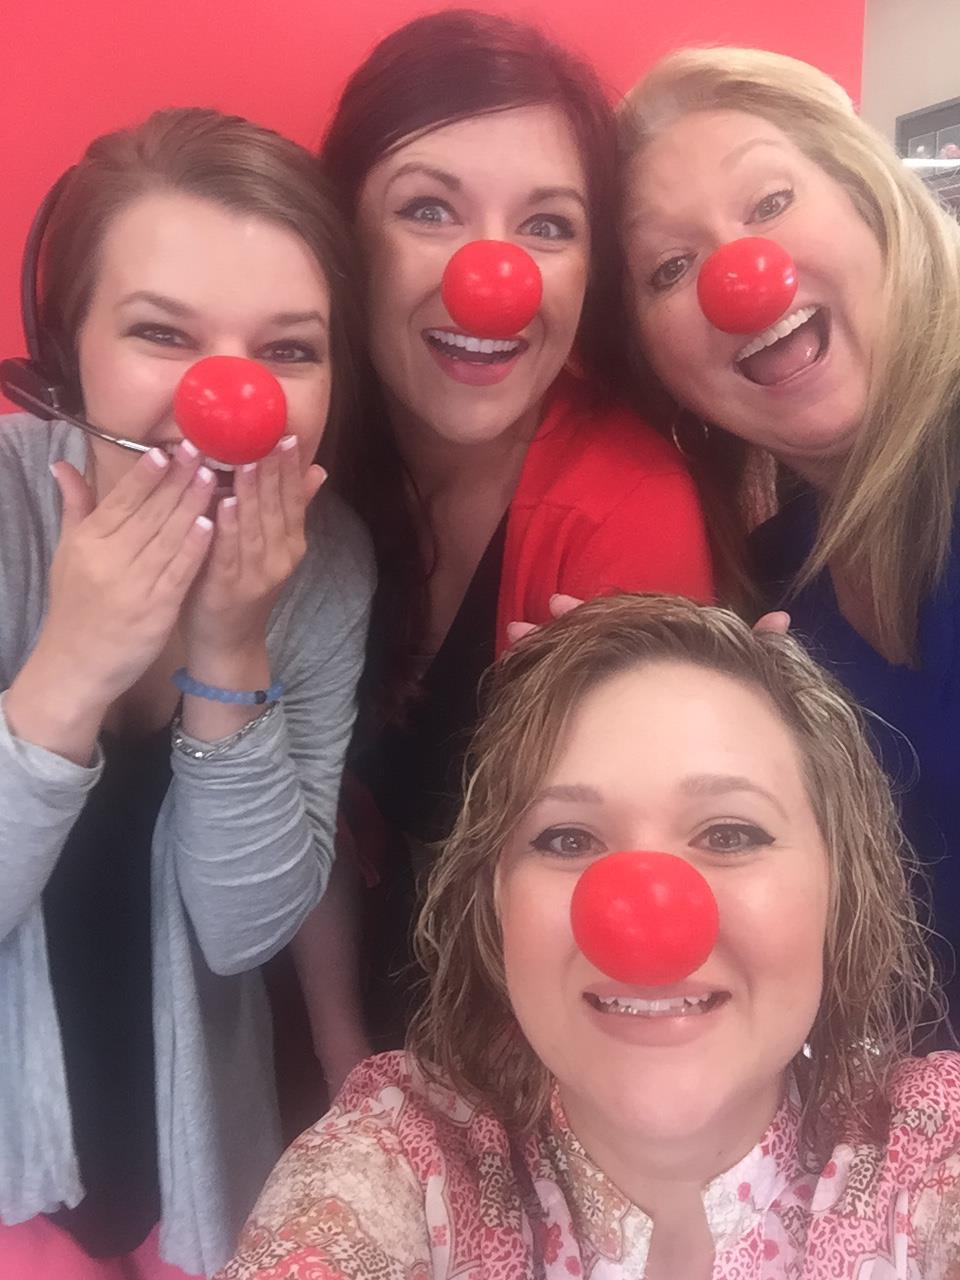 Clowning around on Red Nose Day!